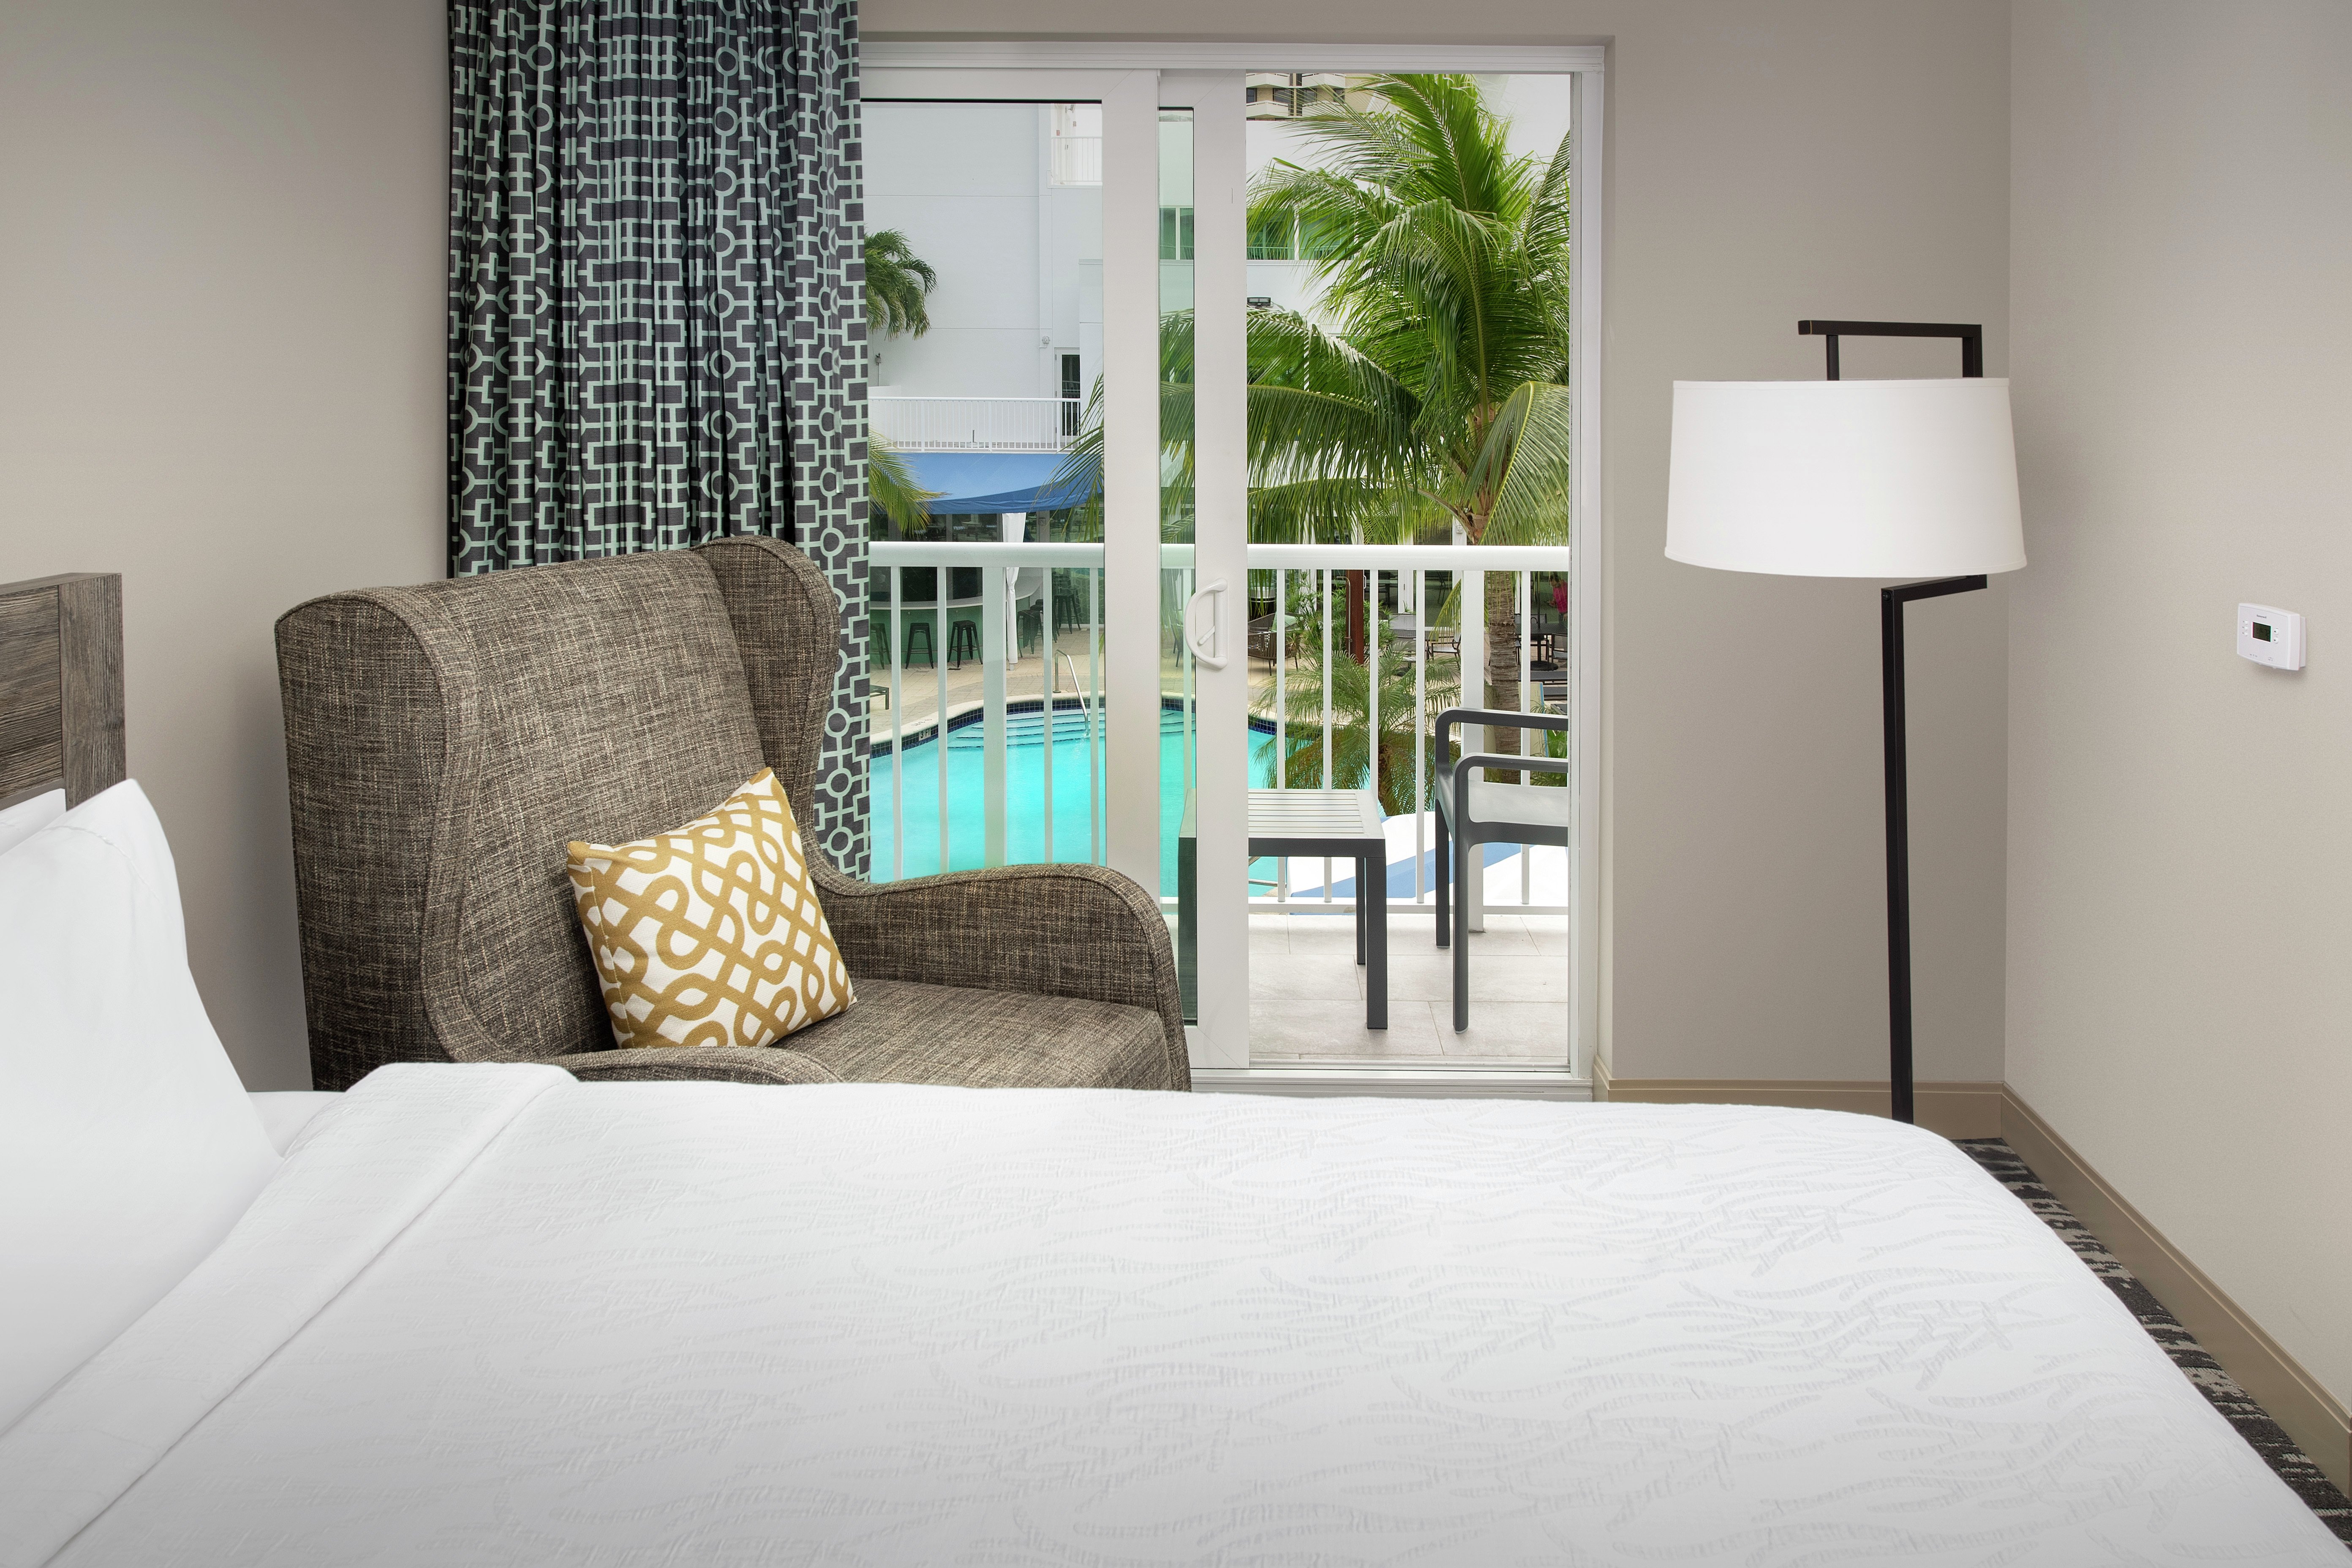 Guestroom with Bed, Lounge Area, and Outside View of Pool